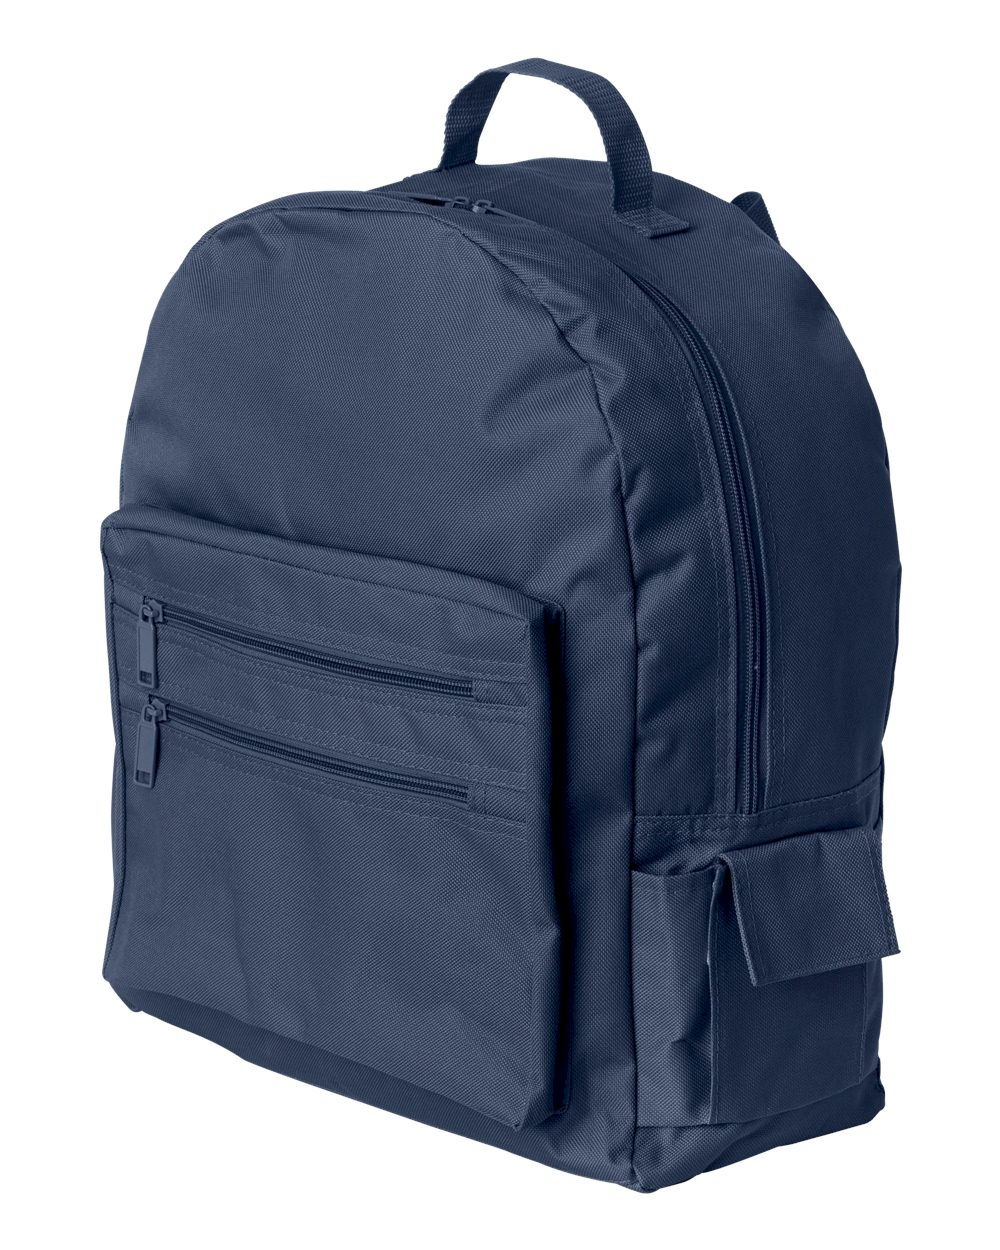 Eco-Friendly 16" Backpack Embroidery Blanks - NAVY